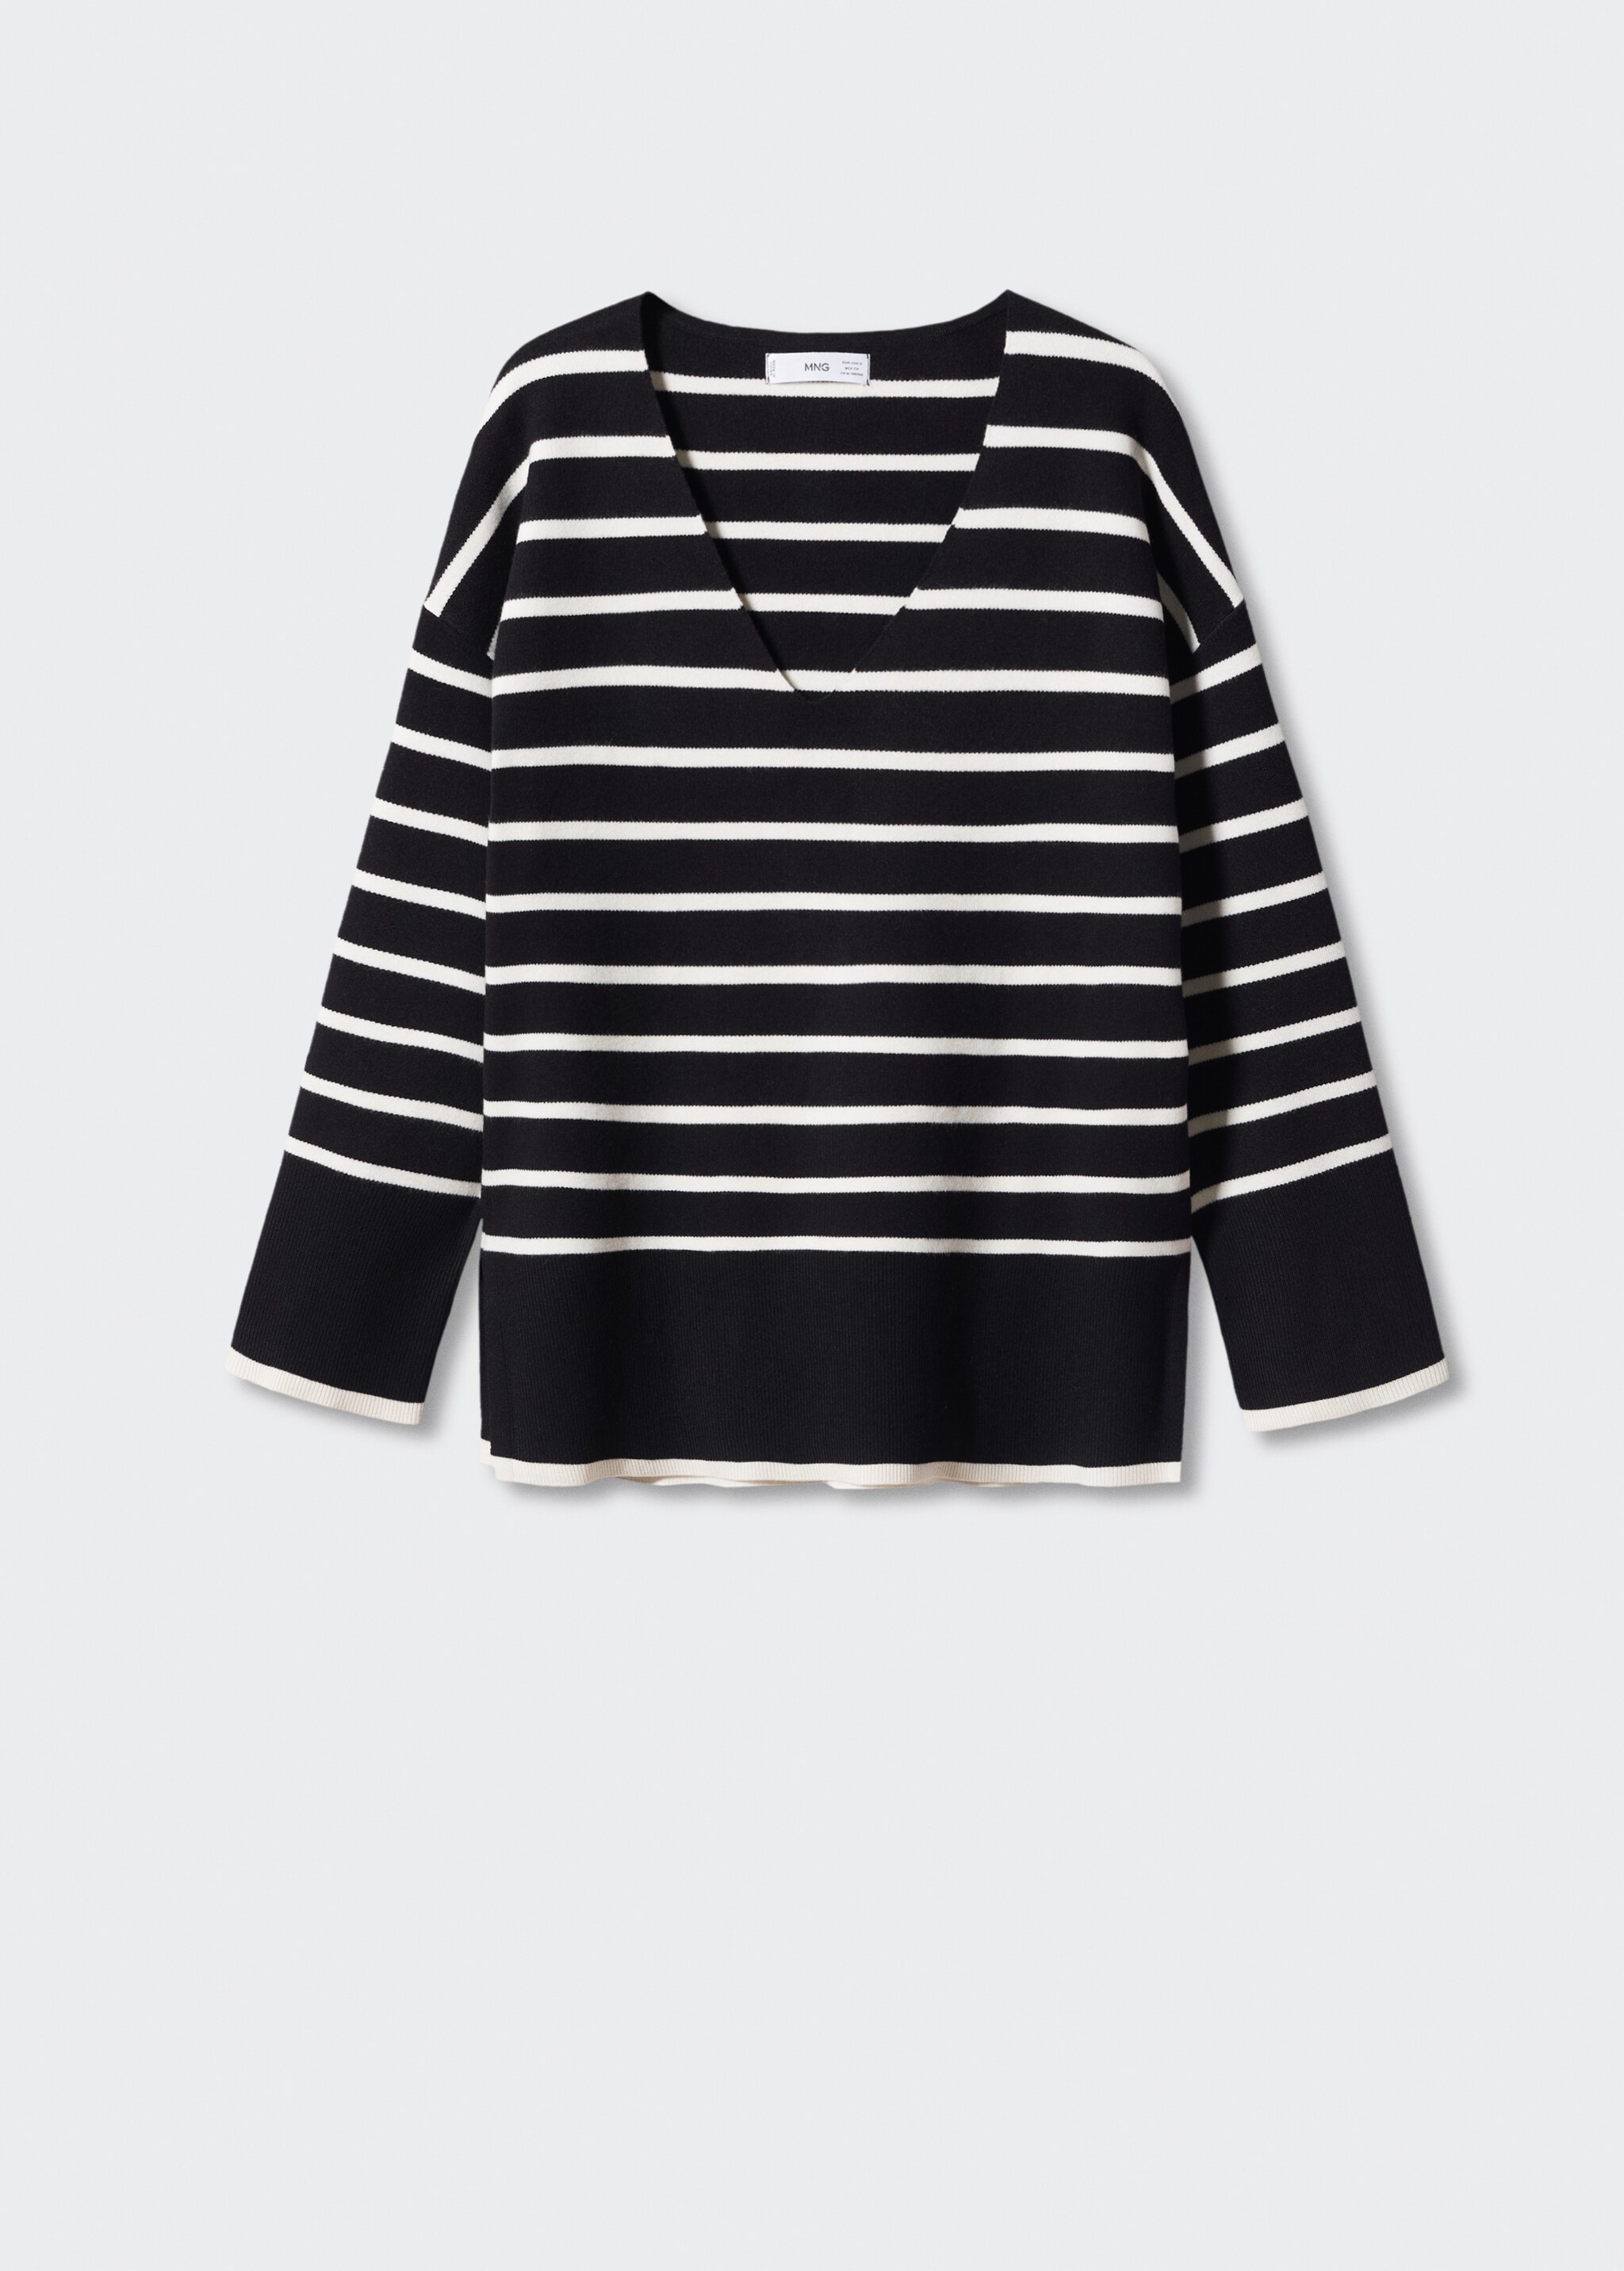 Oversized striped sweater - Article without model